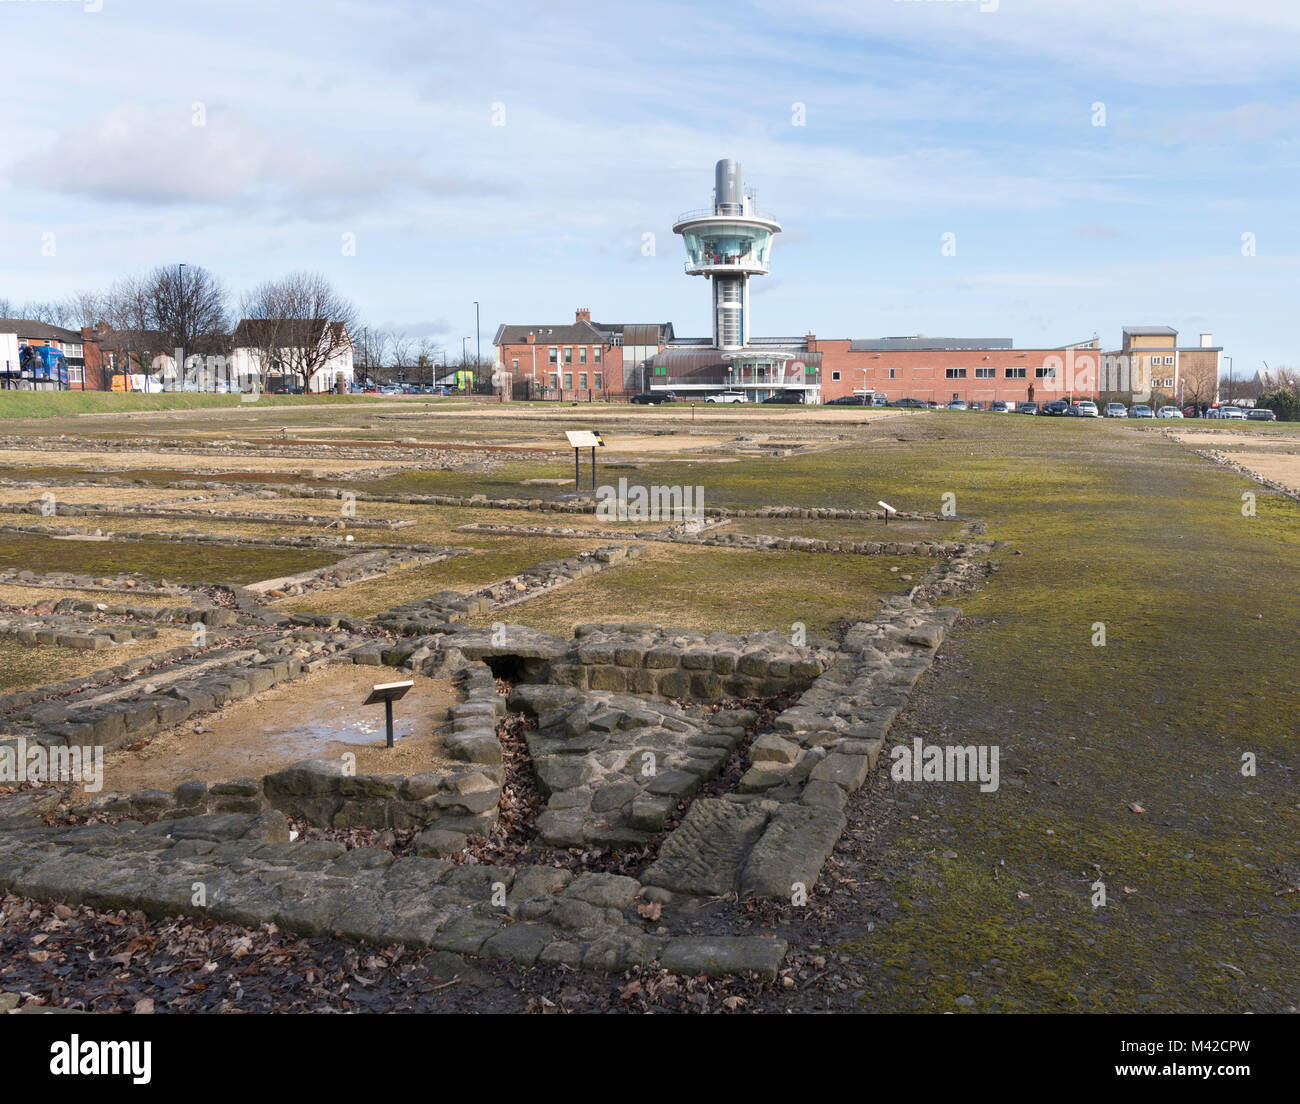 Segedunum Roman Fort, view across site towards observation tower, Wallsend, north east England, UK Stock Photo